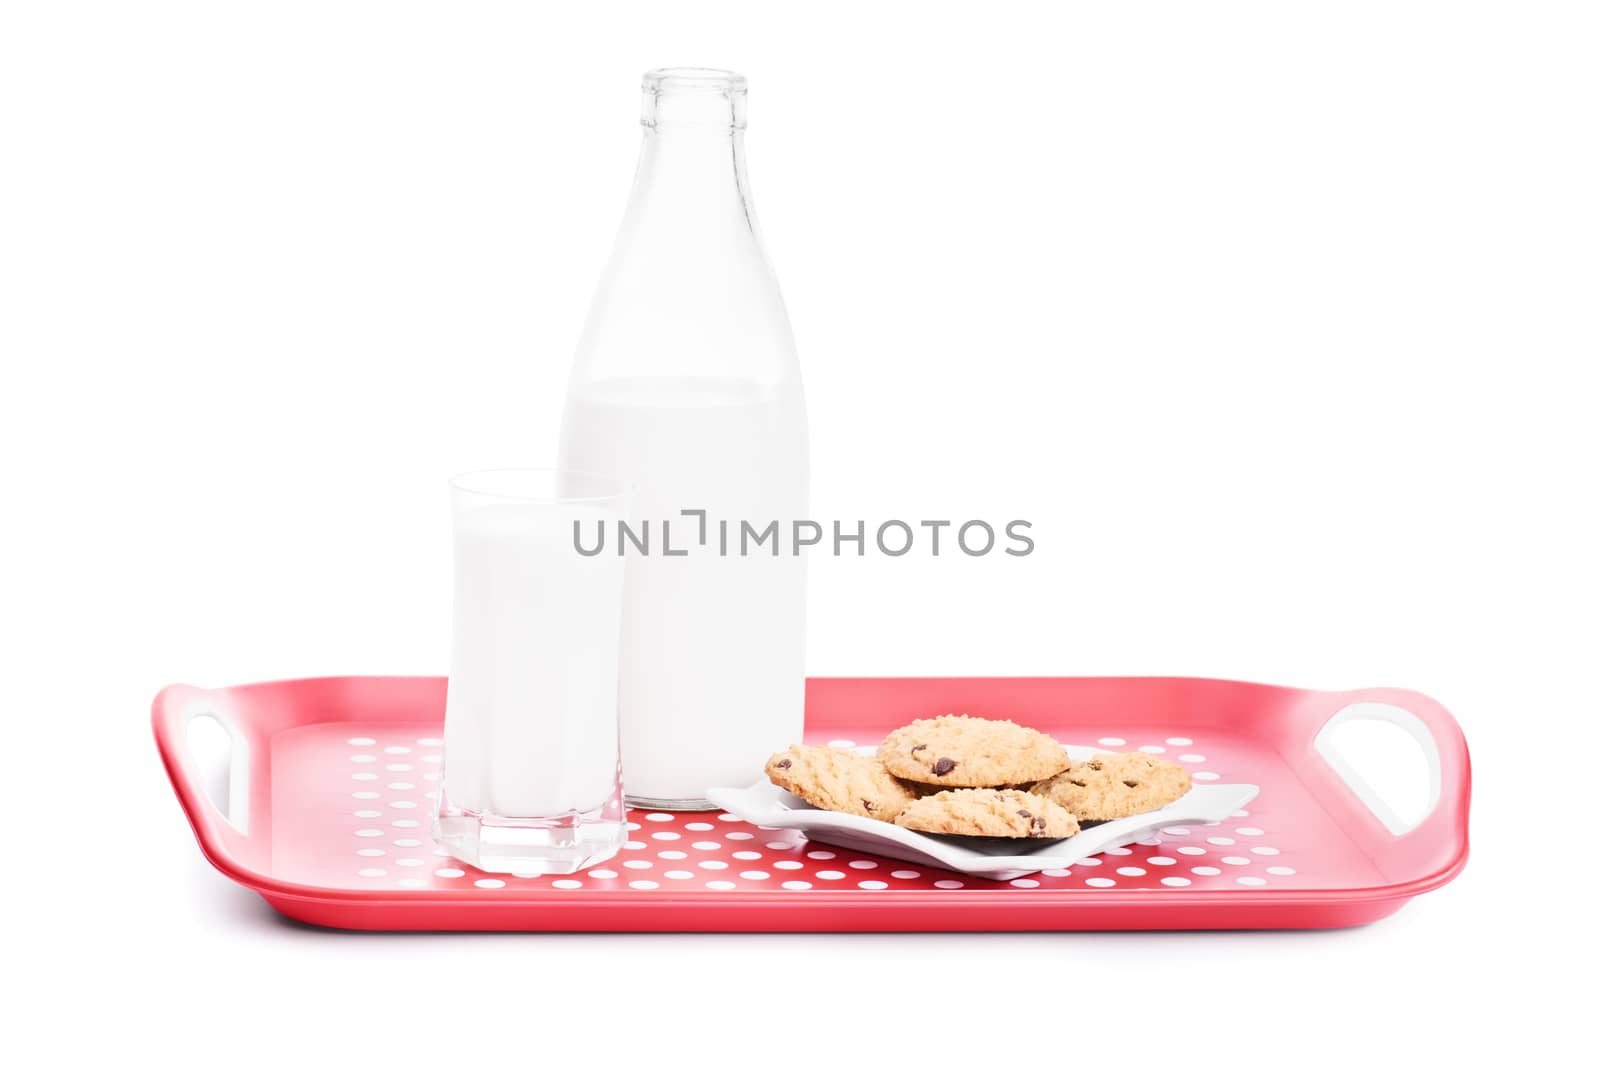 Close up shot of a bottle and glass of milk and chocolate chip cookies on a platter, isolated on white background.